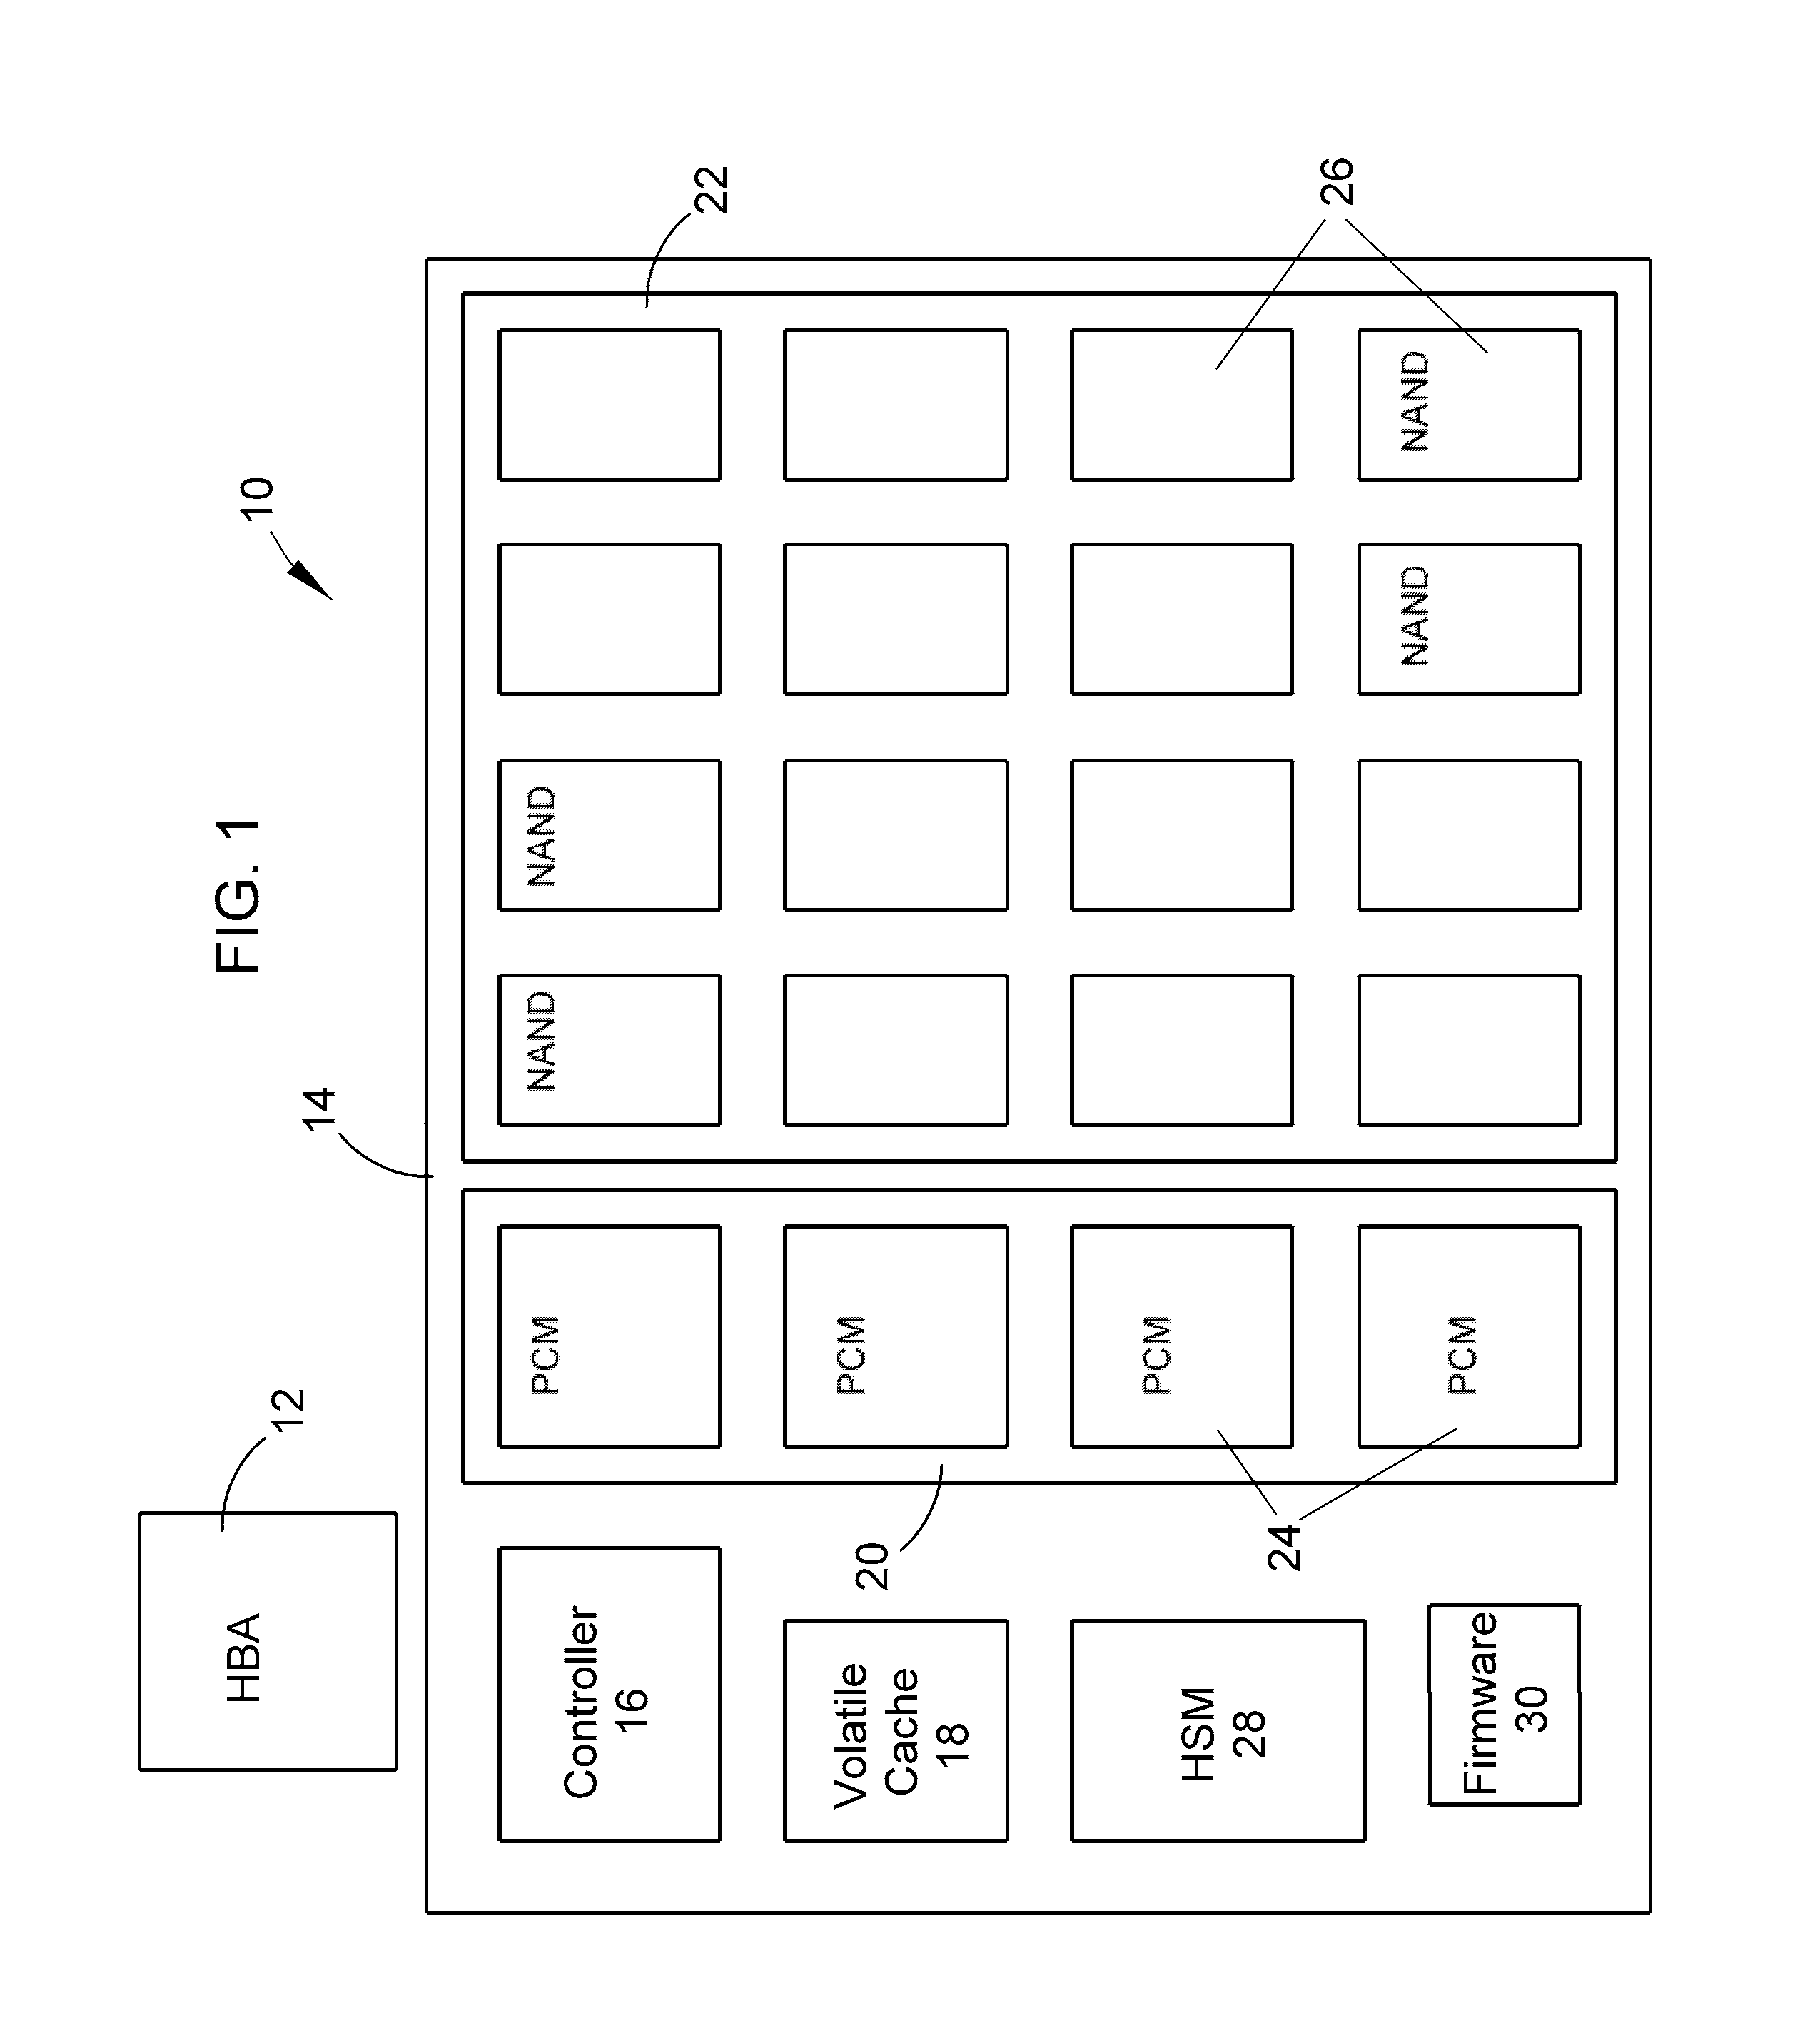 Hierarchically structured mass storage device and method